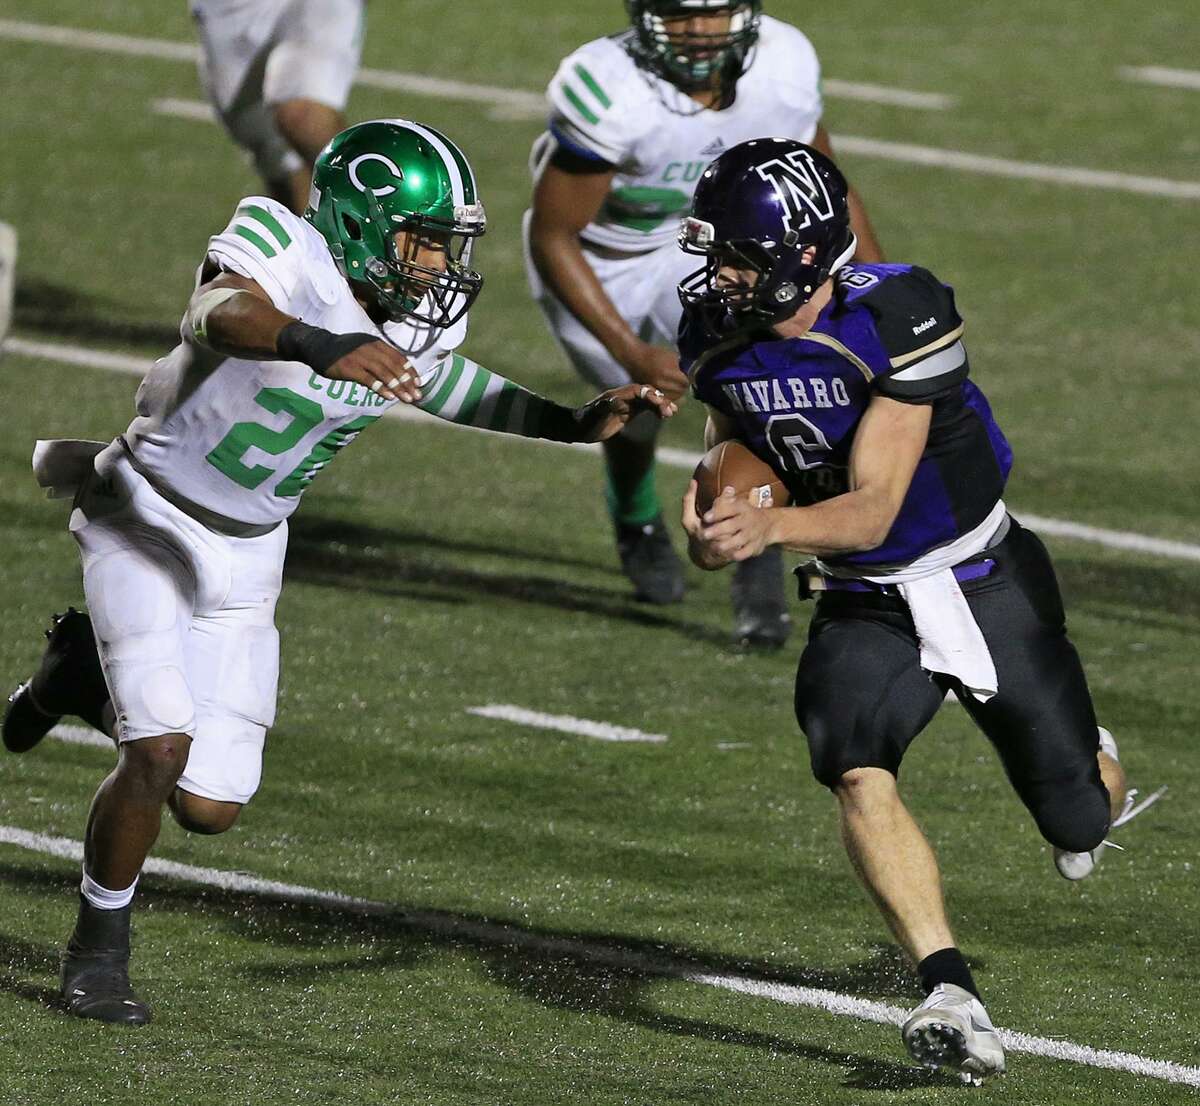 Navarro's Will Eveld looks for room around Cuero's Claeson Patton during second half action of their Class 4A Division II third-round playoff game held Friday Dec. 1, 2017 at Heroes Stadium.